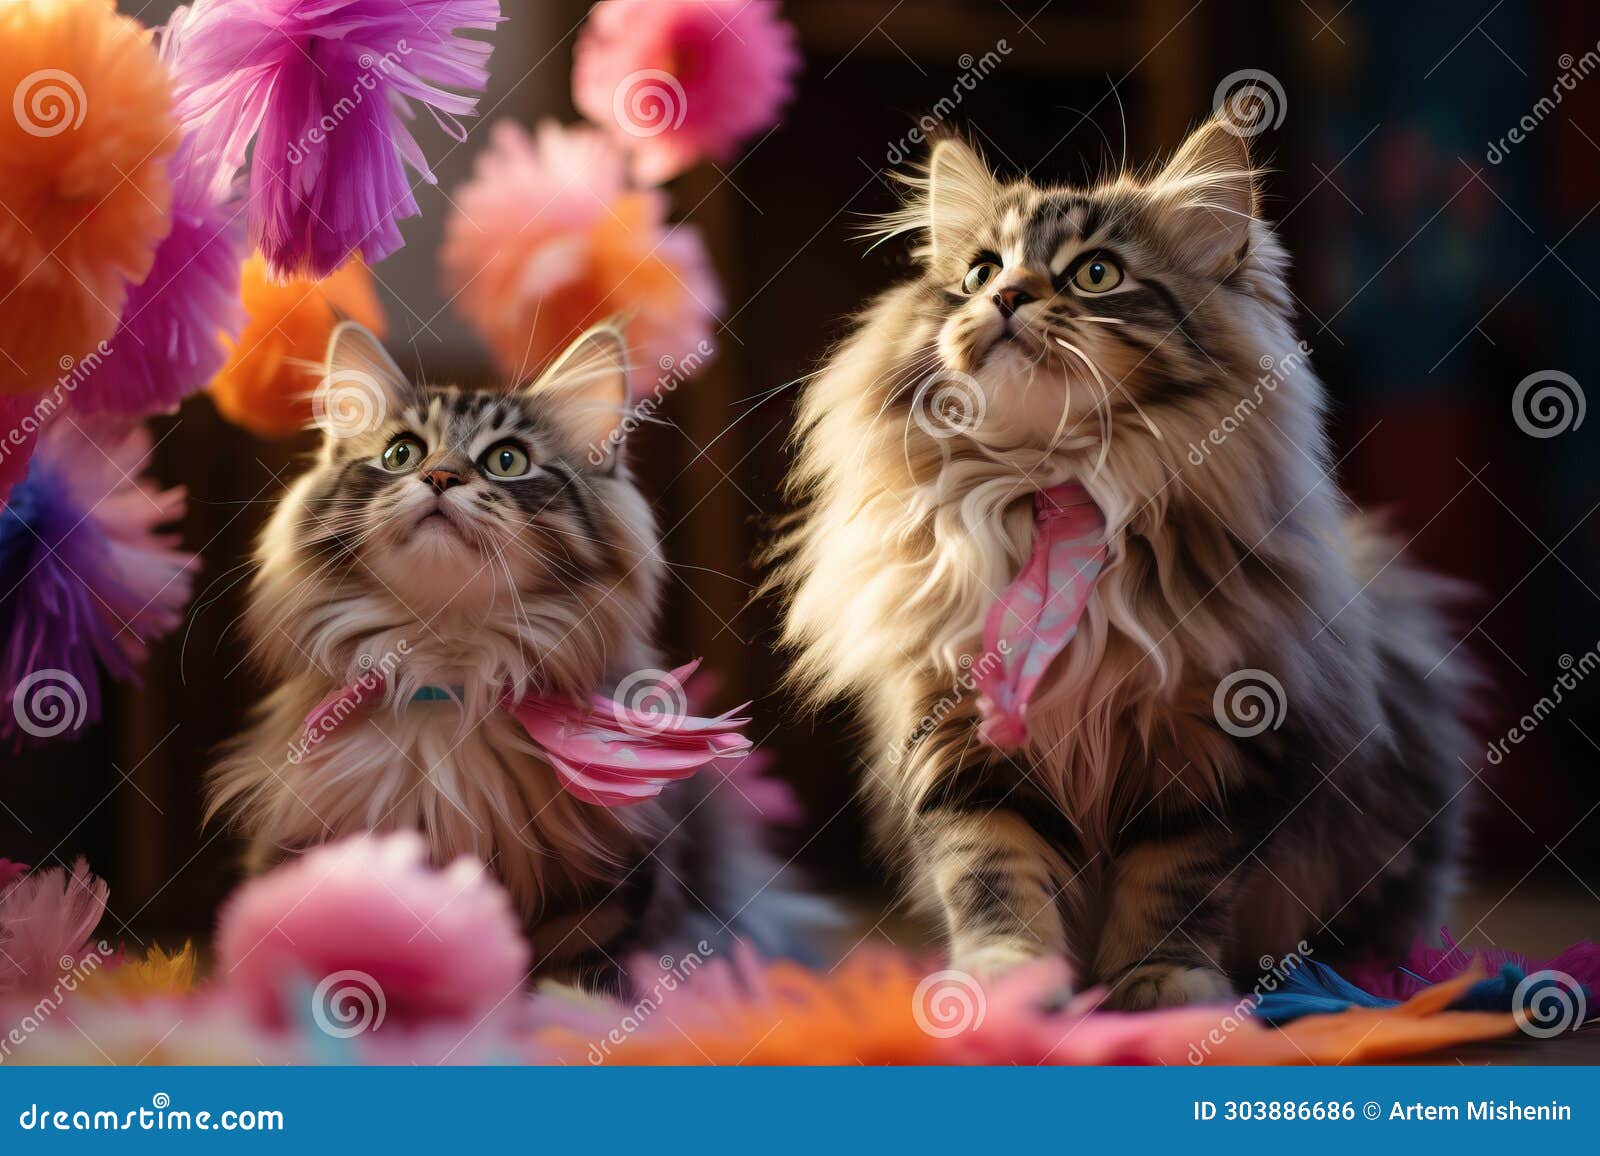 two furry cats look up spellbound.